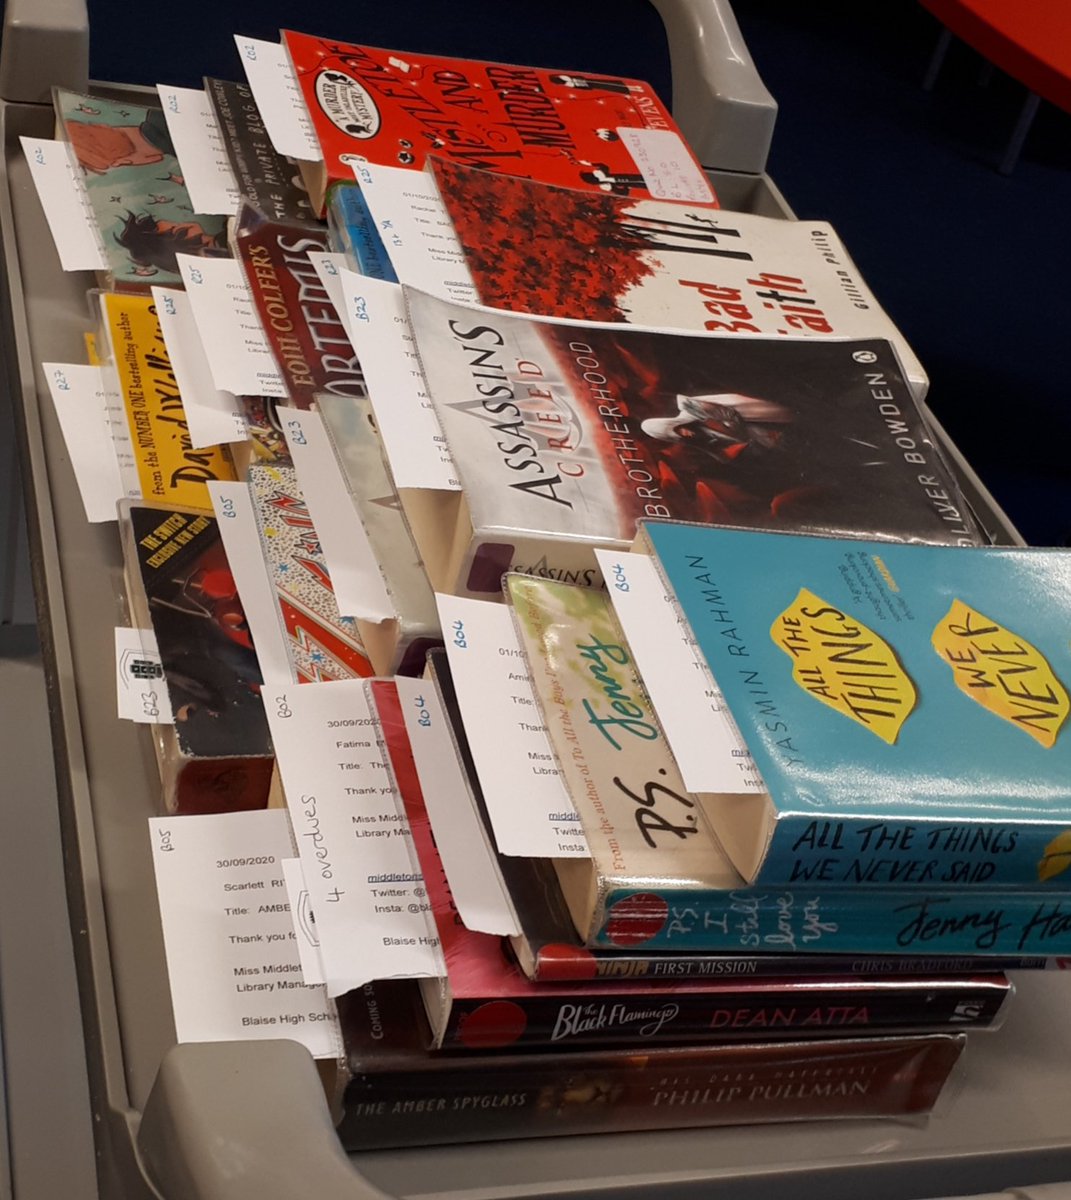 Just a few of the 80 book reservations going out today..@AccessitLib  @GreenshawTrust #onlinelibrary #keepkidsreading @GreatSchLibs